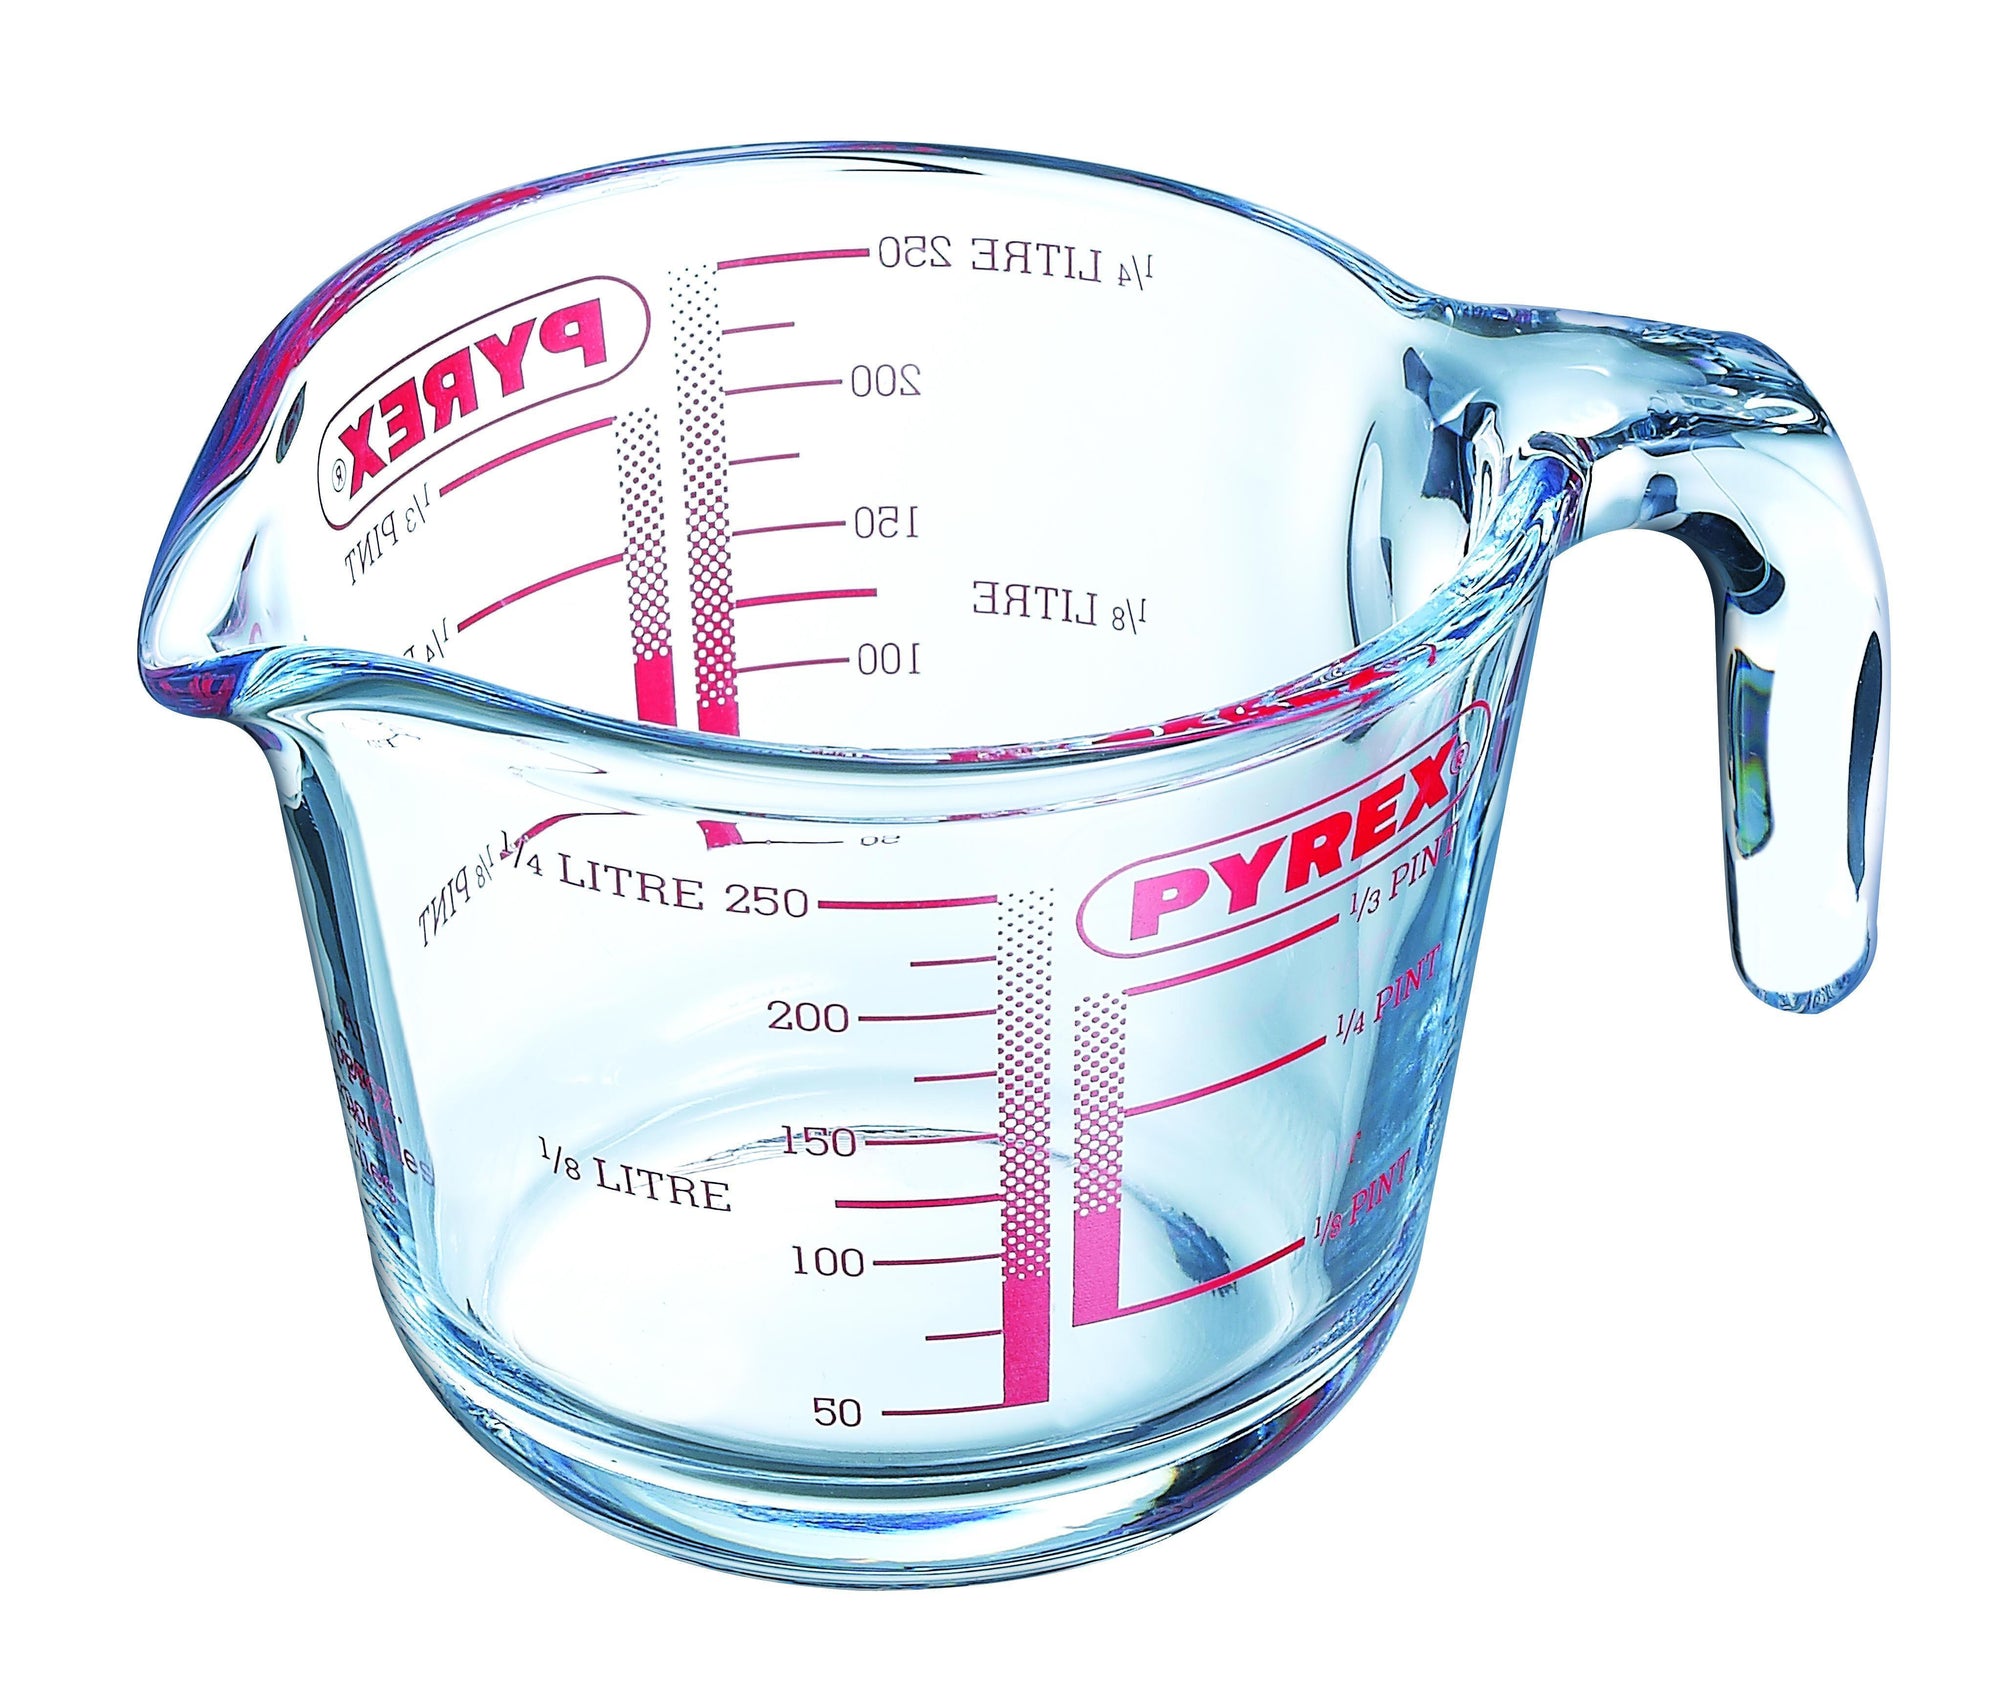 PYREX vs. pyrex: Which Is Safer?